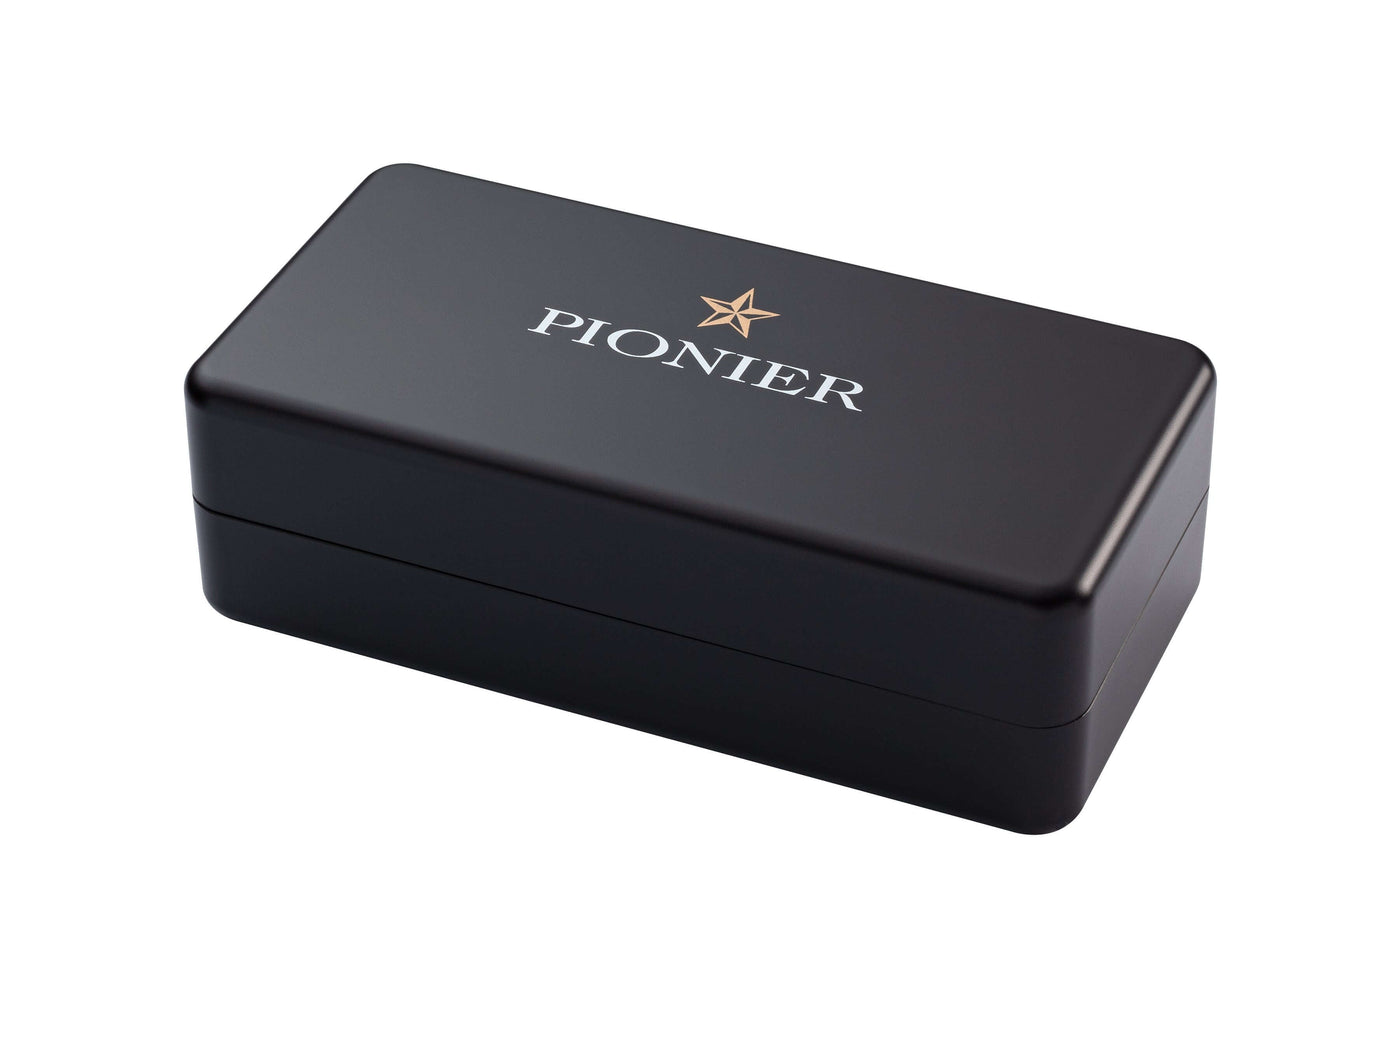 Black box with Pionier logo on top a yellow star